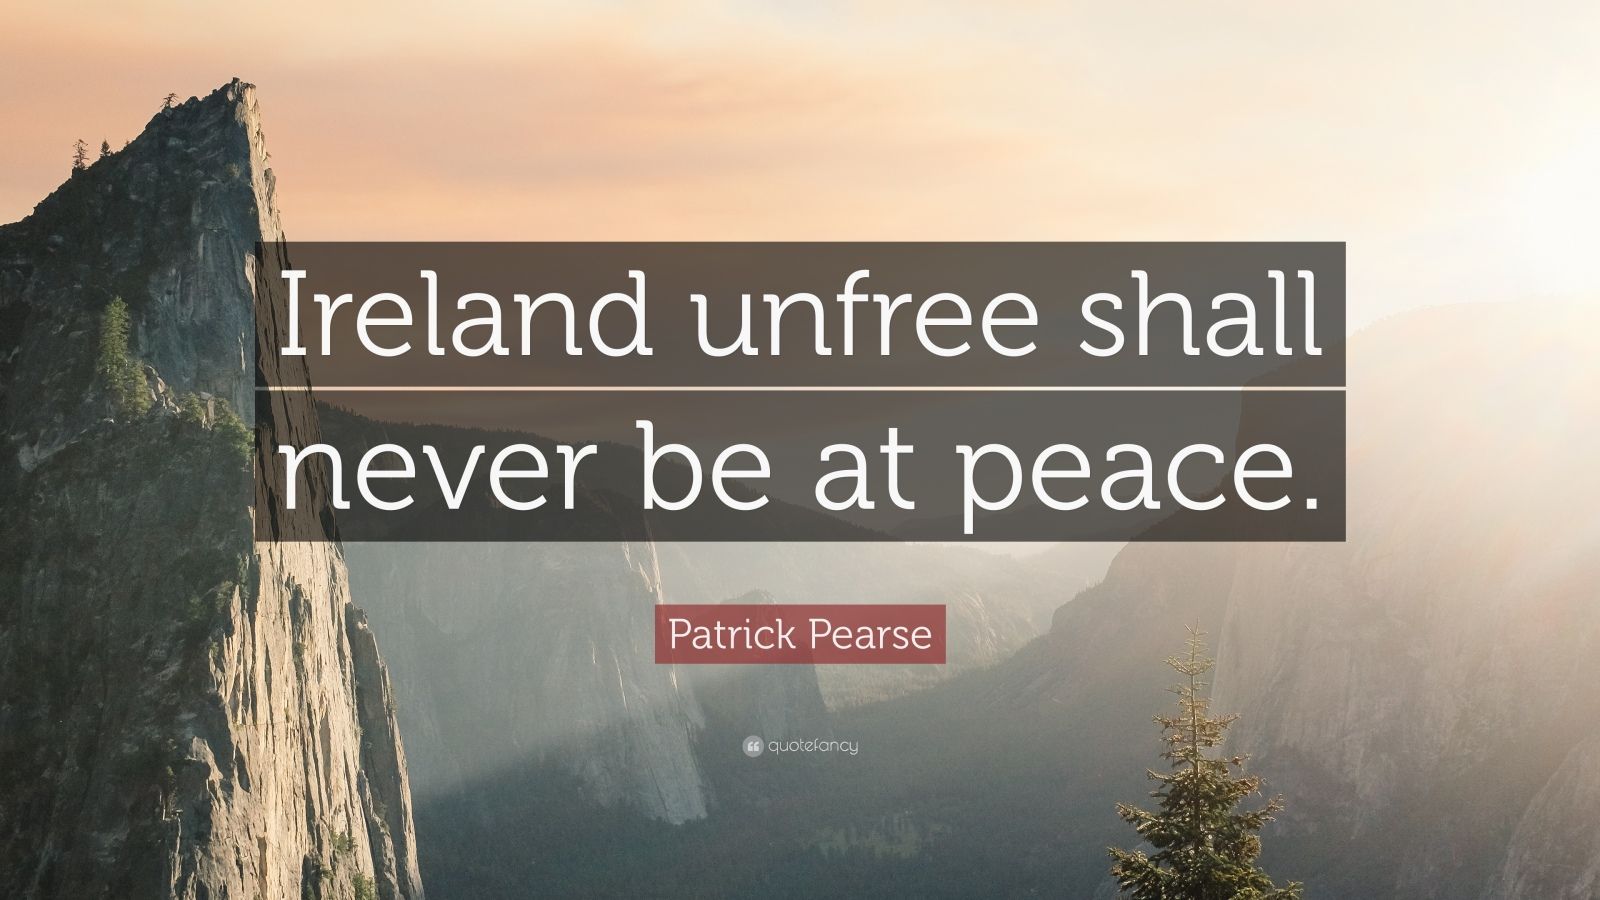 Top 10 Patrick Pearse Quotes (2021 Update) - Quotefancy